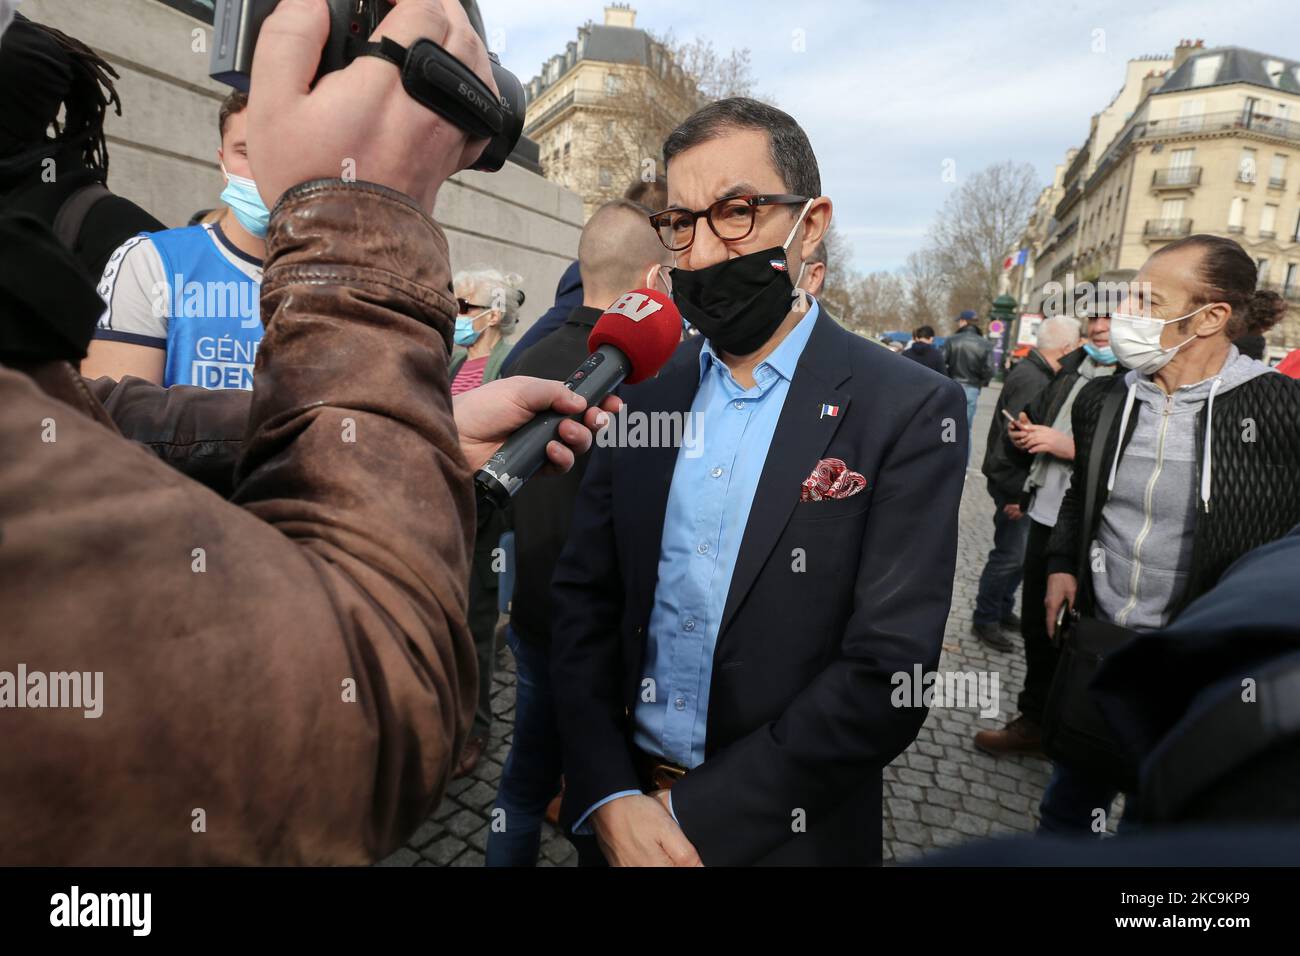 Member of far-right Rassemblement National's (RN) Jean Messiha (C) speaks with the press during a protest against the far right Generation Identitaire group's potential dissolution in Place Denfert Rochereau, in Paris on February 20, 2021. The dissolution of Generation identitaire was evoked for the first time on January 26, 2021 by Interior Minister, as a reaction to the group's recent anti-migrant operation in the Pyrenees, which led to a preliminary investigation for provocation to racial hatred. (Photo by Michel Stoupak/NurPhoto) Stock Photo